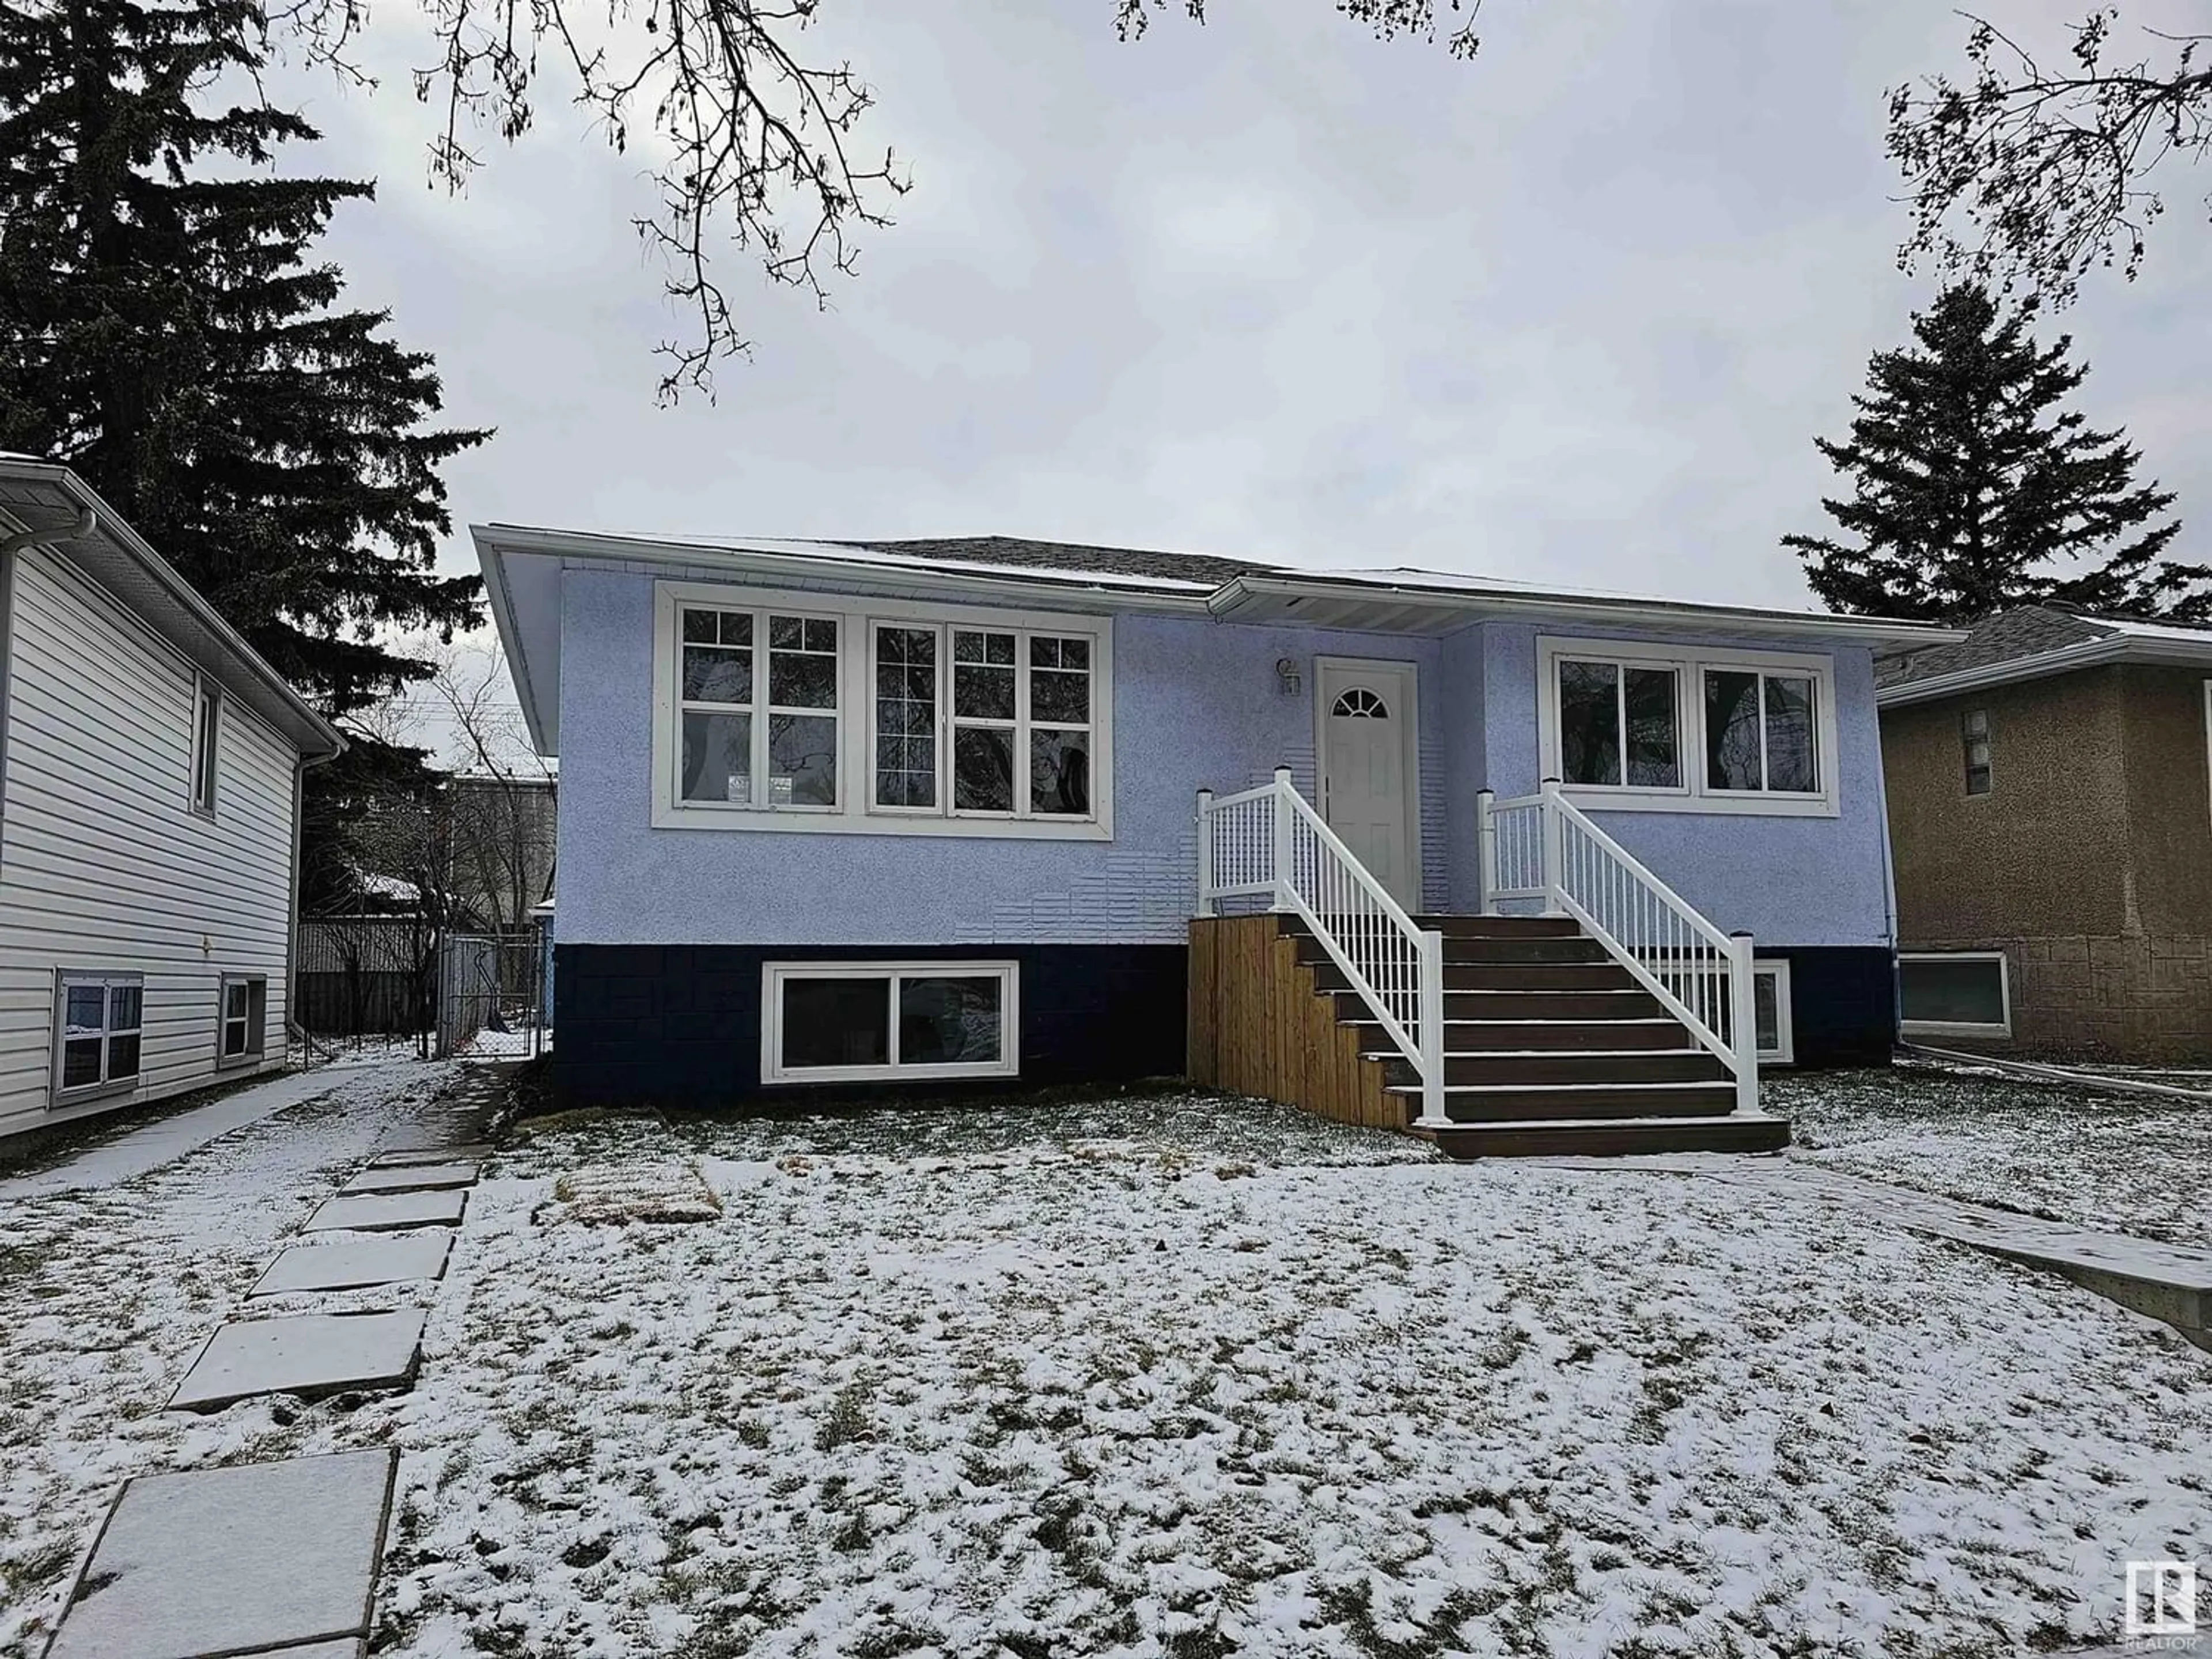 Outside view for 12412 96 ST NW, Edmonton Alberta T5G1W7